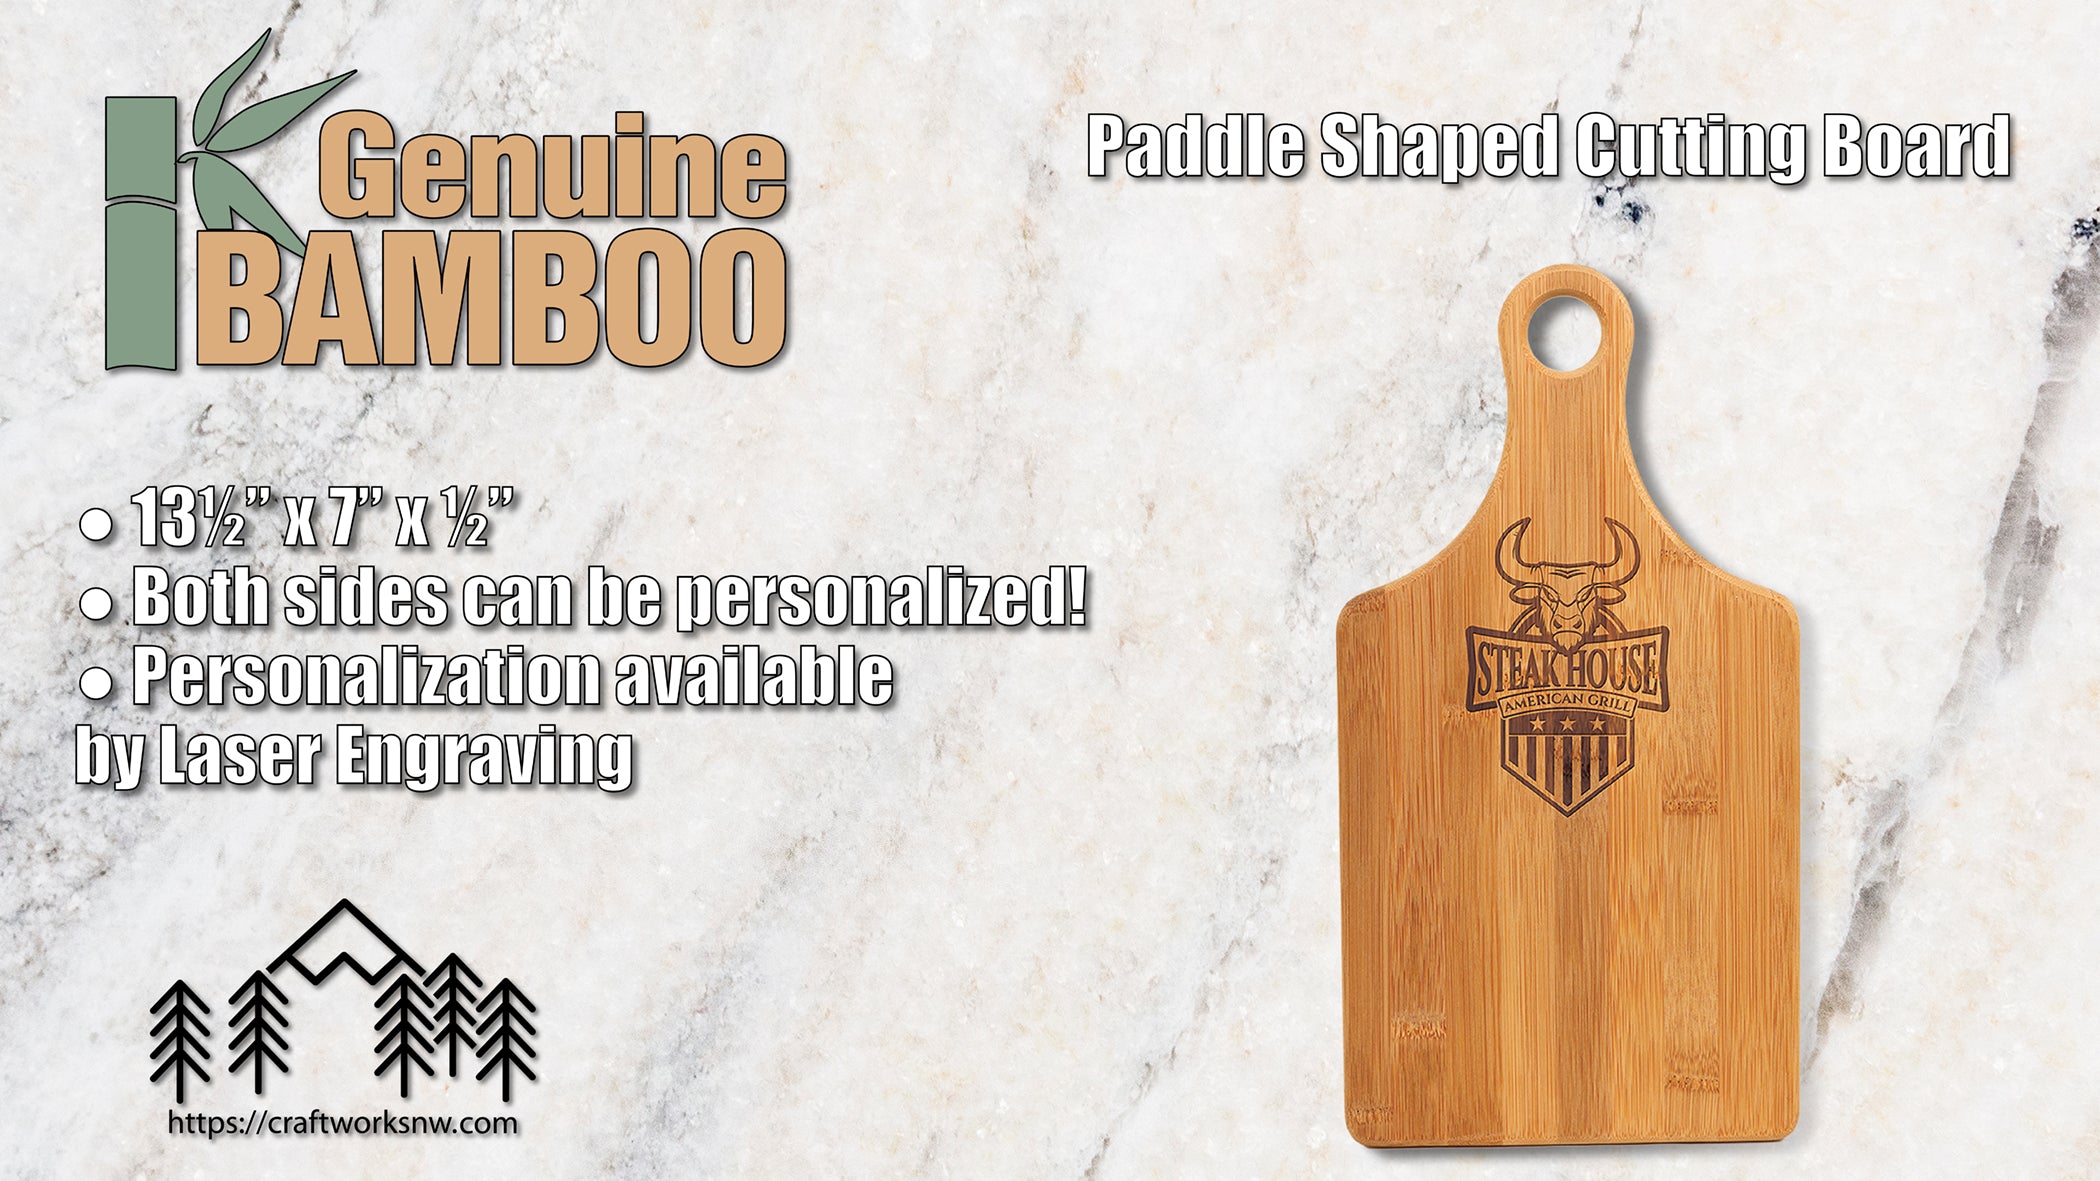 Cutting Board Paddle Shape, Bamboo, 13 1/2" x 7", Laser Engraved - Craftworks NW, LLC